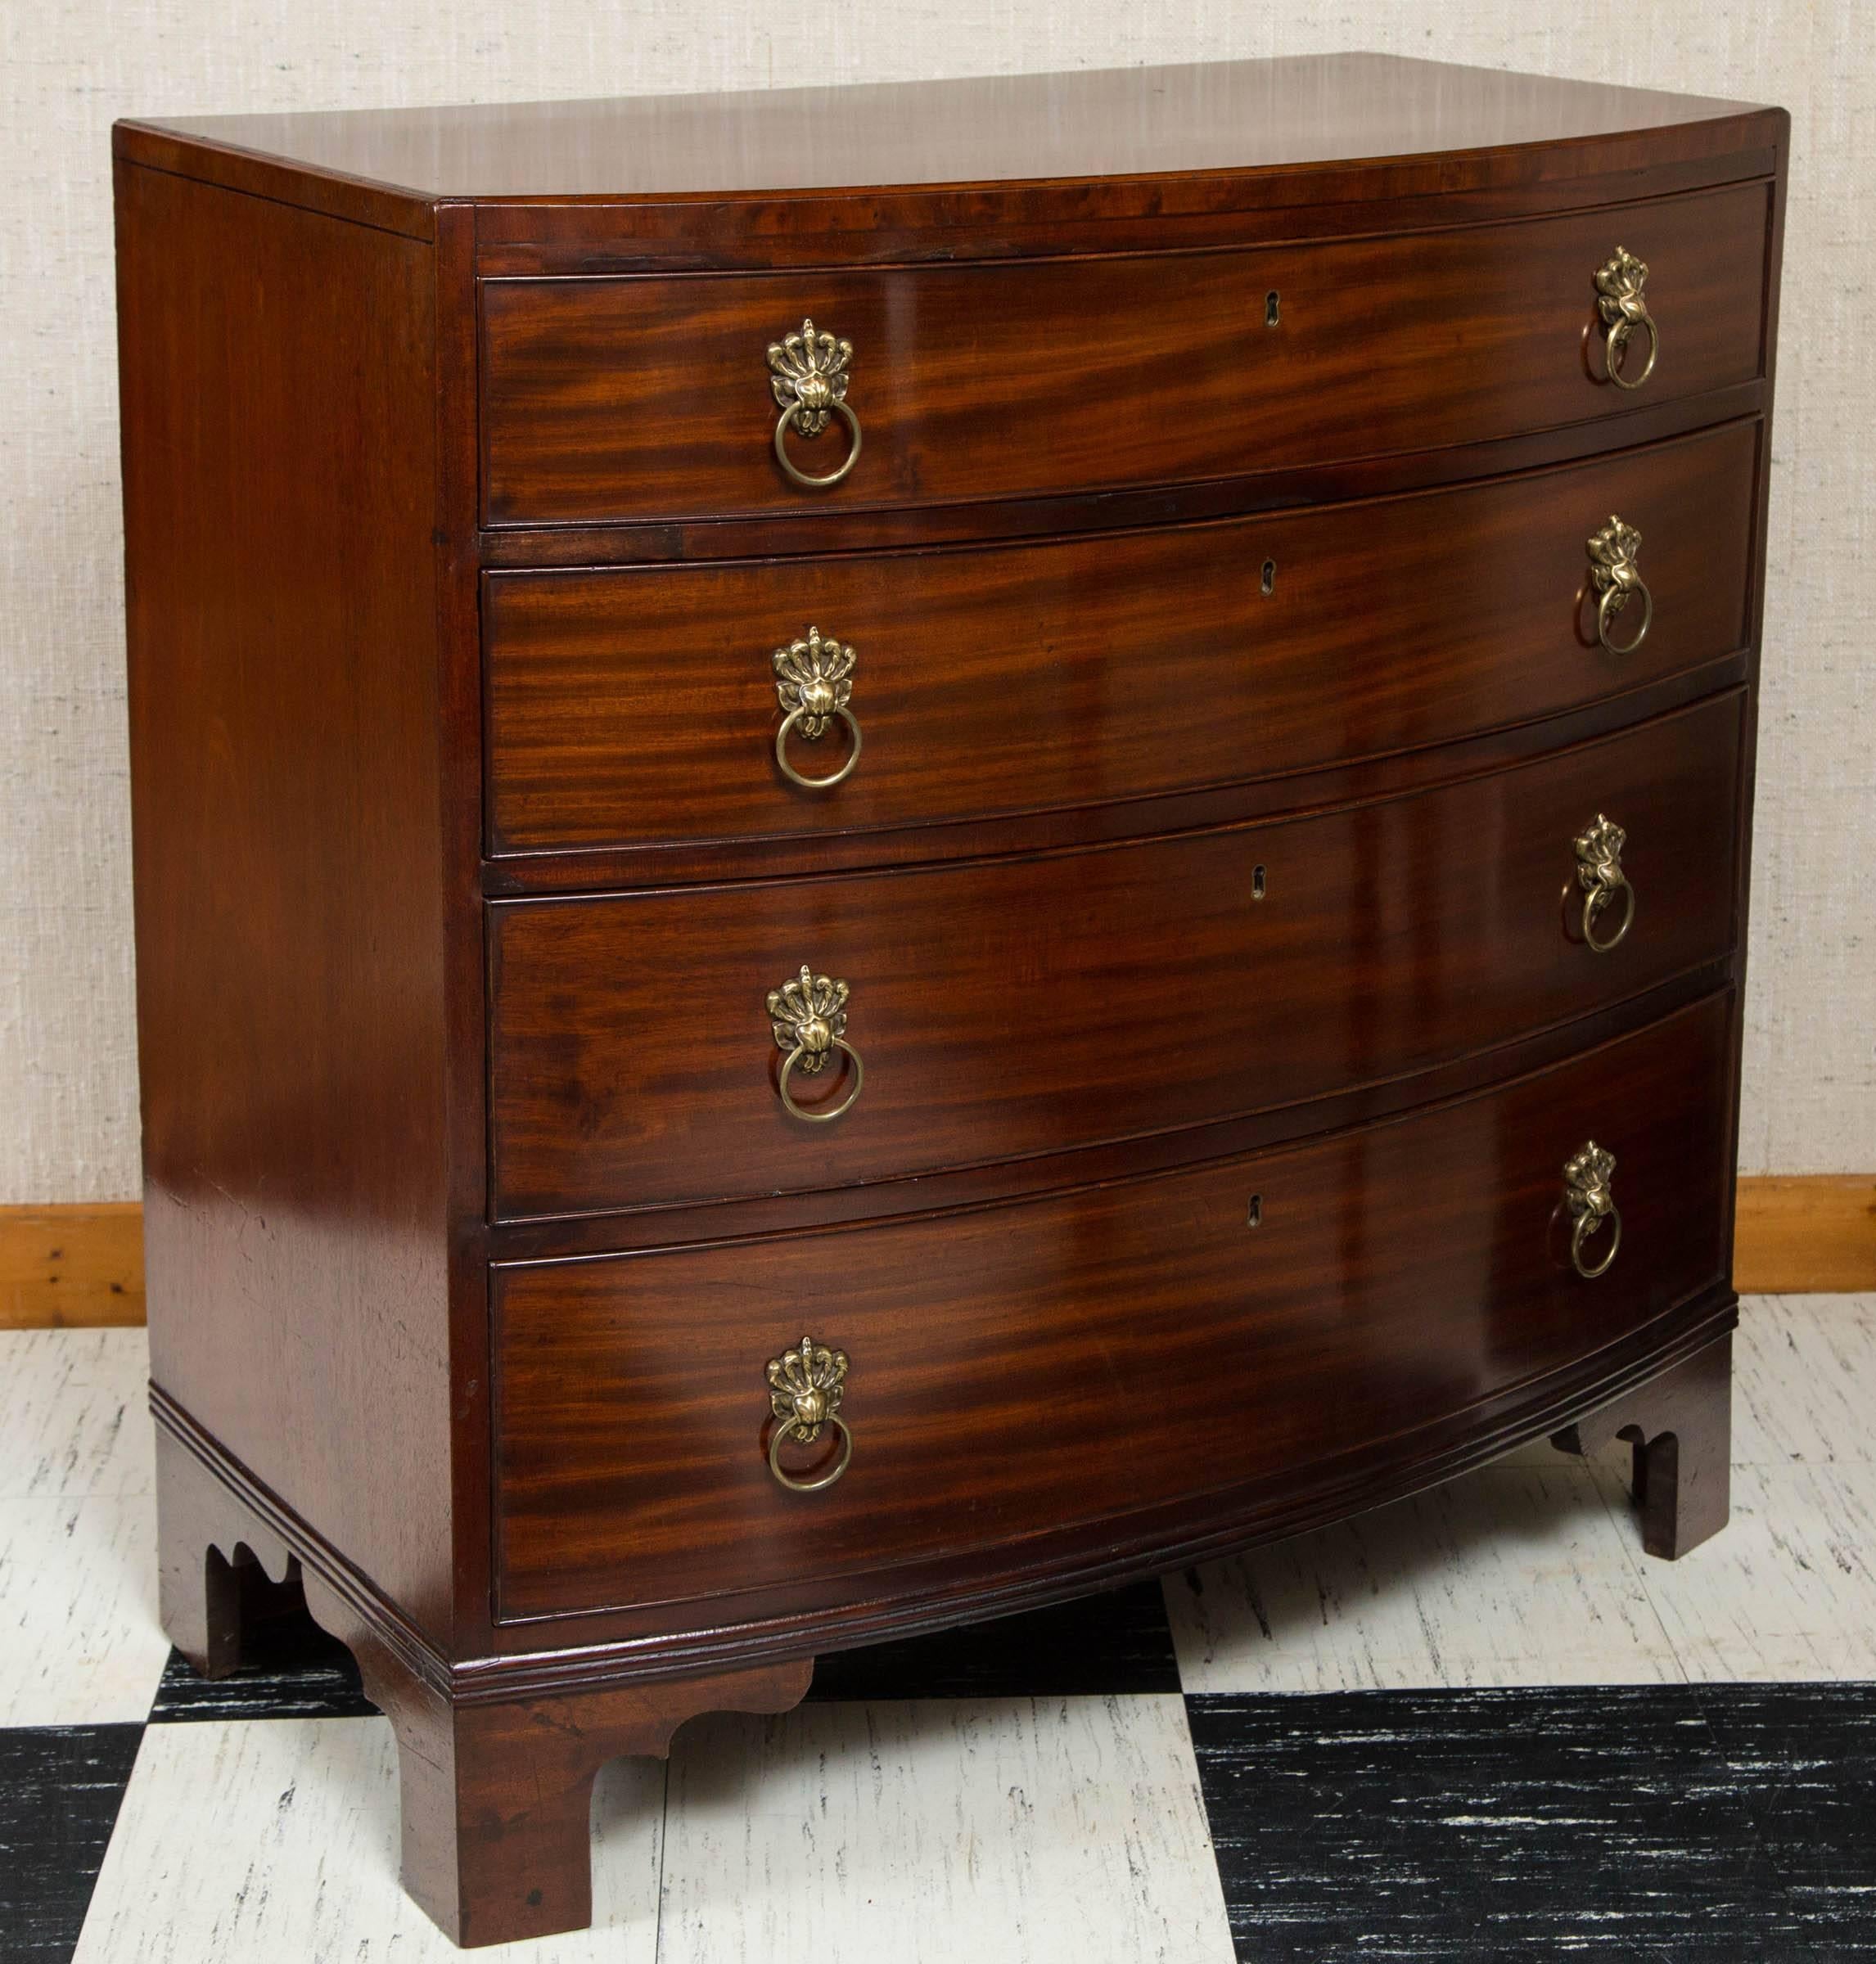 Classic bow front chest of drawers with brass ring pulls.  Four graduated drawers standing over splayed feet with reeded moulding along bottom.  Unusual ebony string inlay on the top and sides of chest.